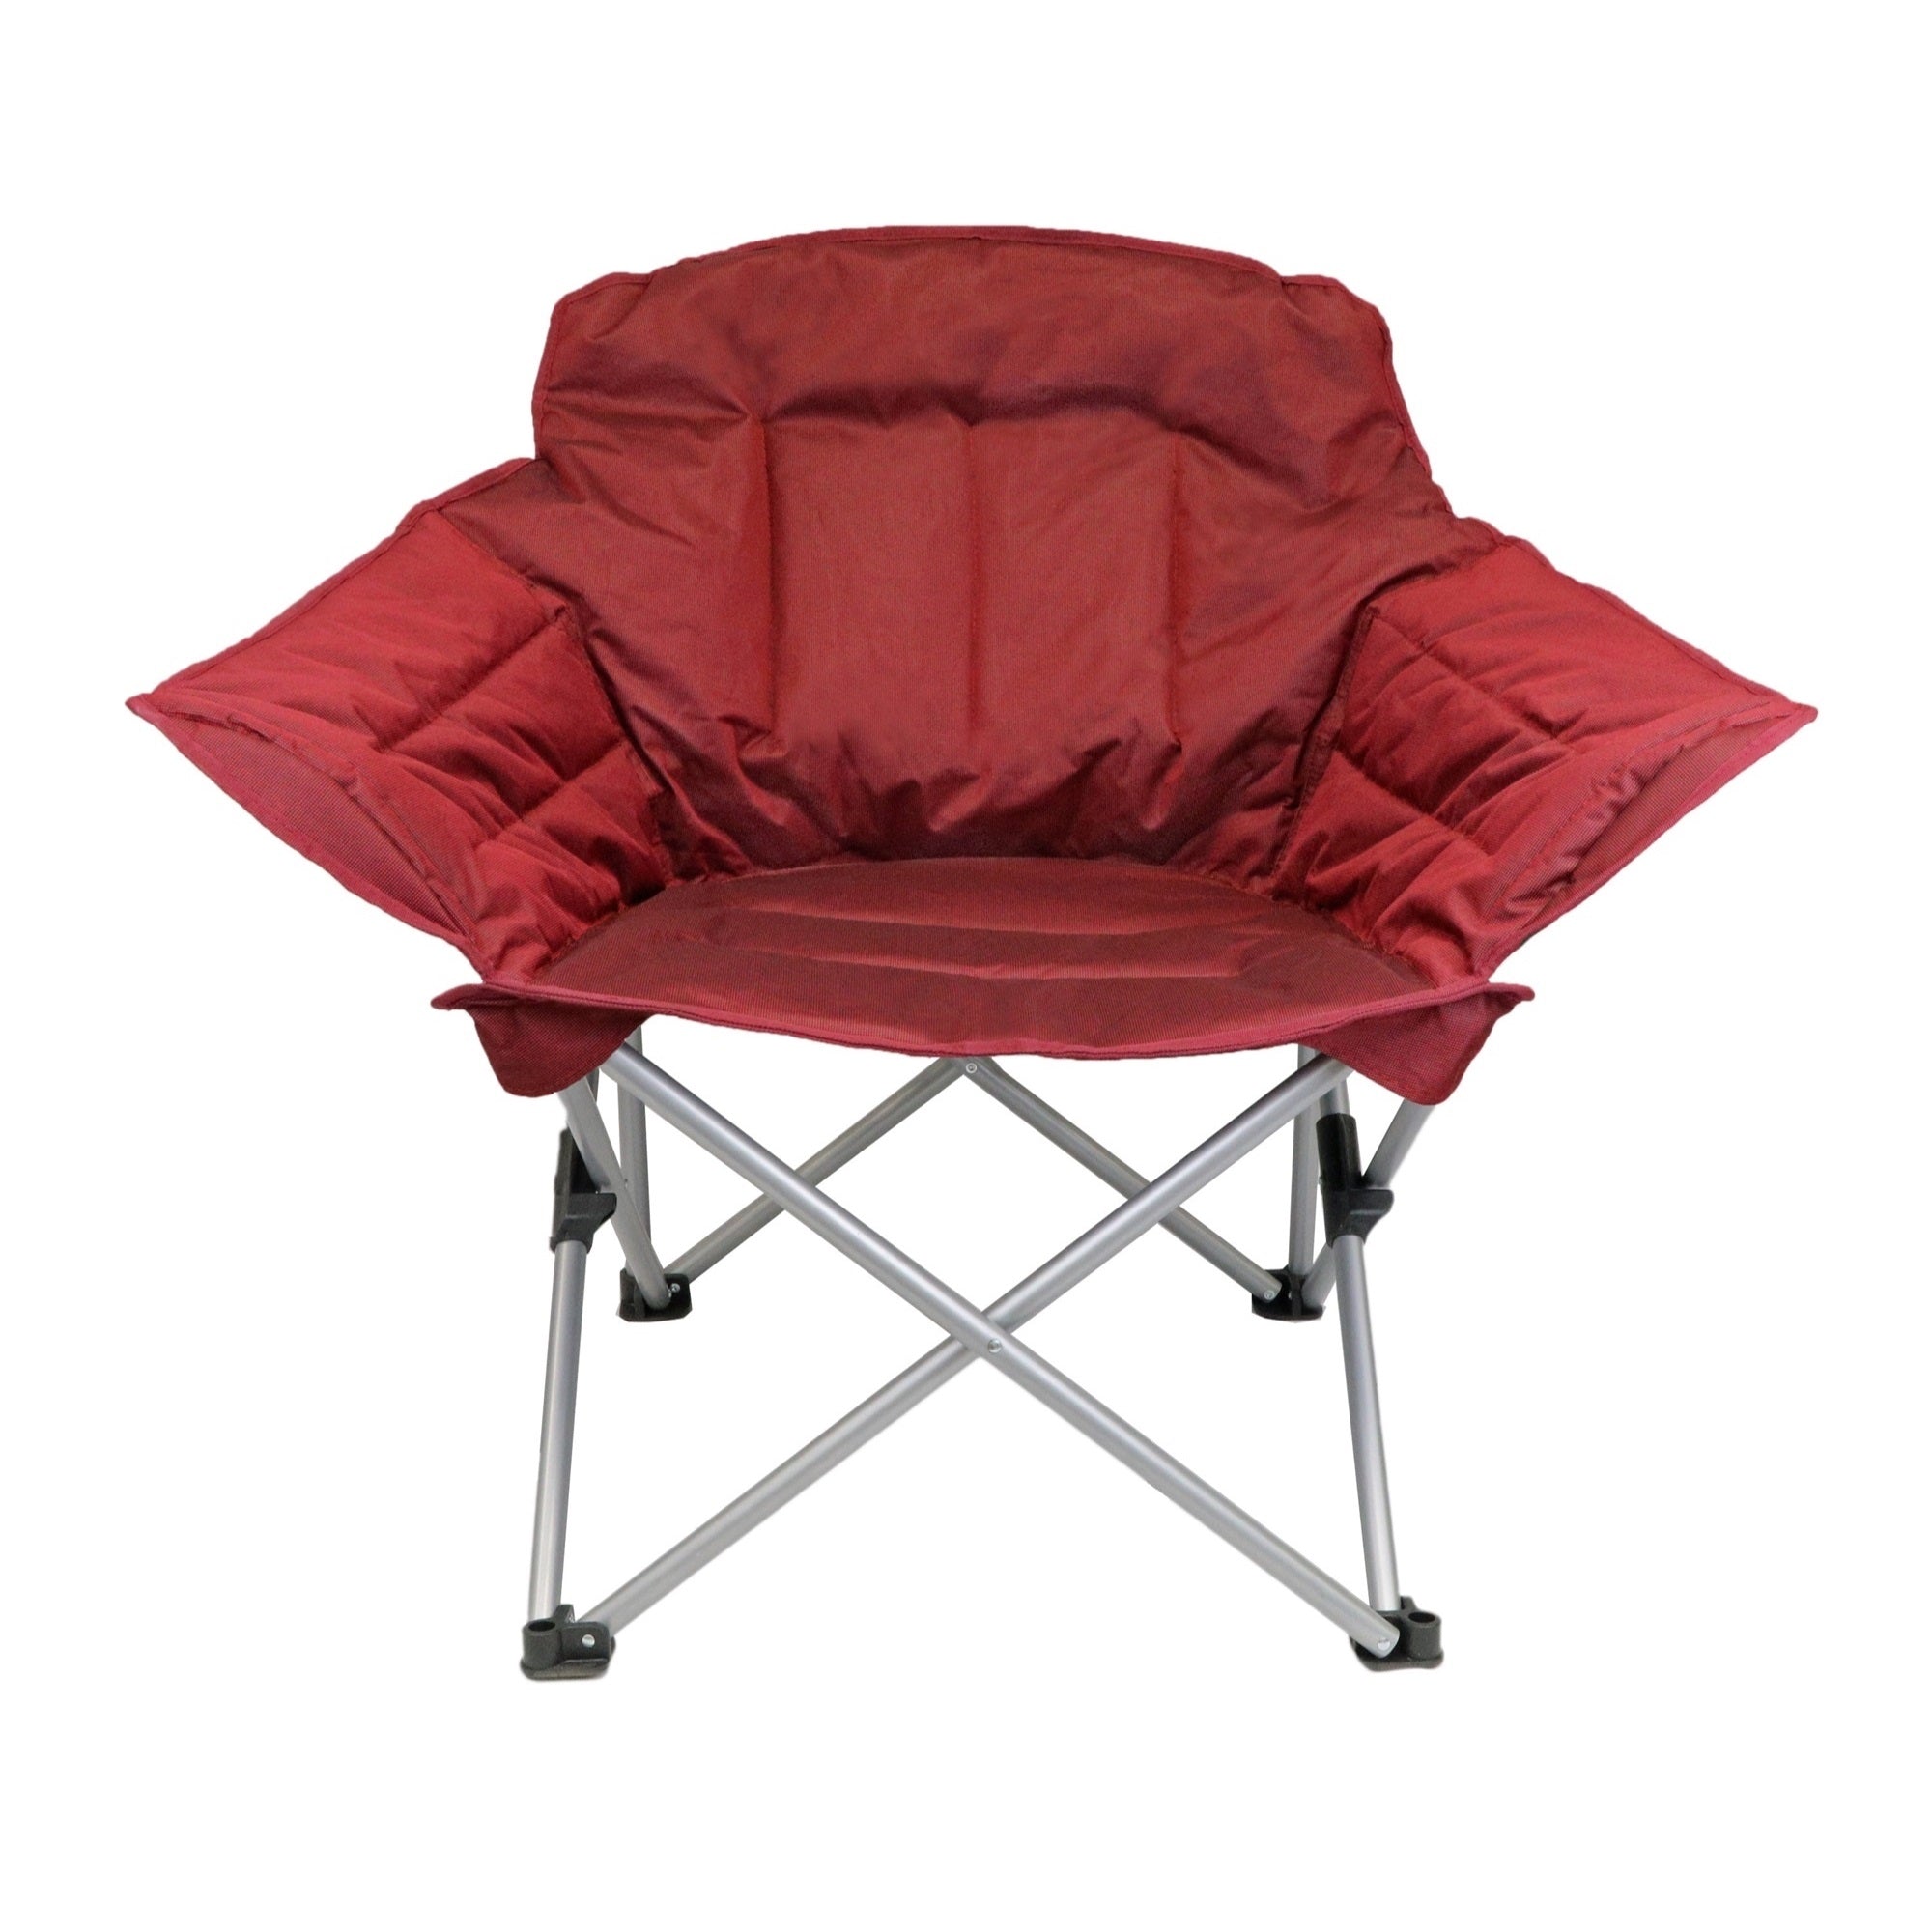 Zenithen Limited Guidesman Portable Padded Folding Chair, Red - Pack of 1